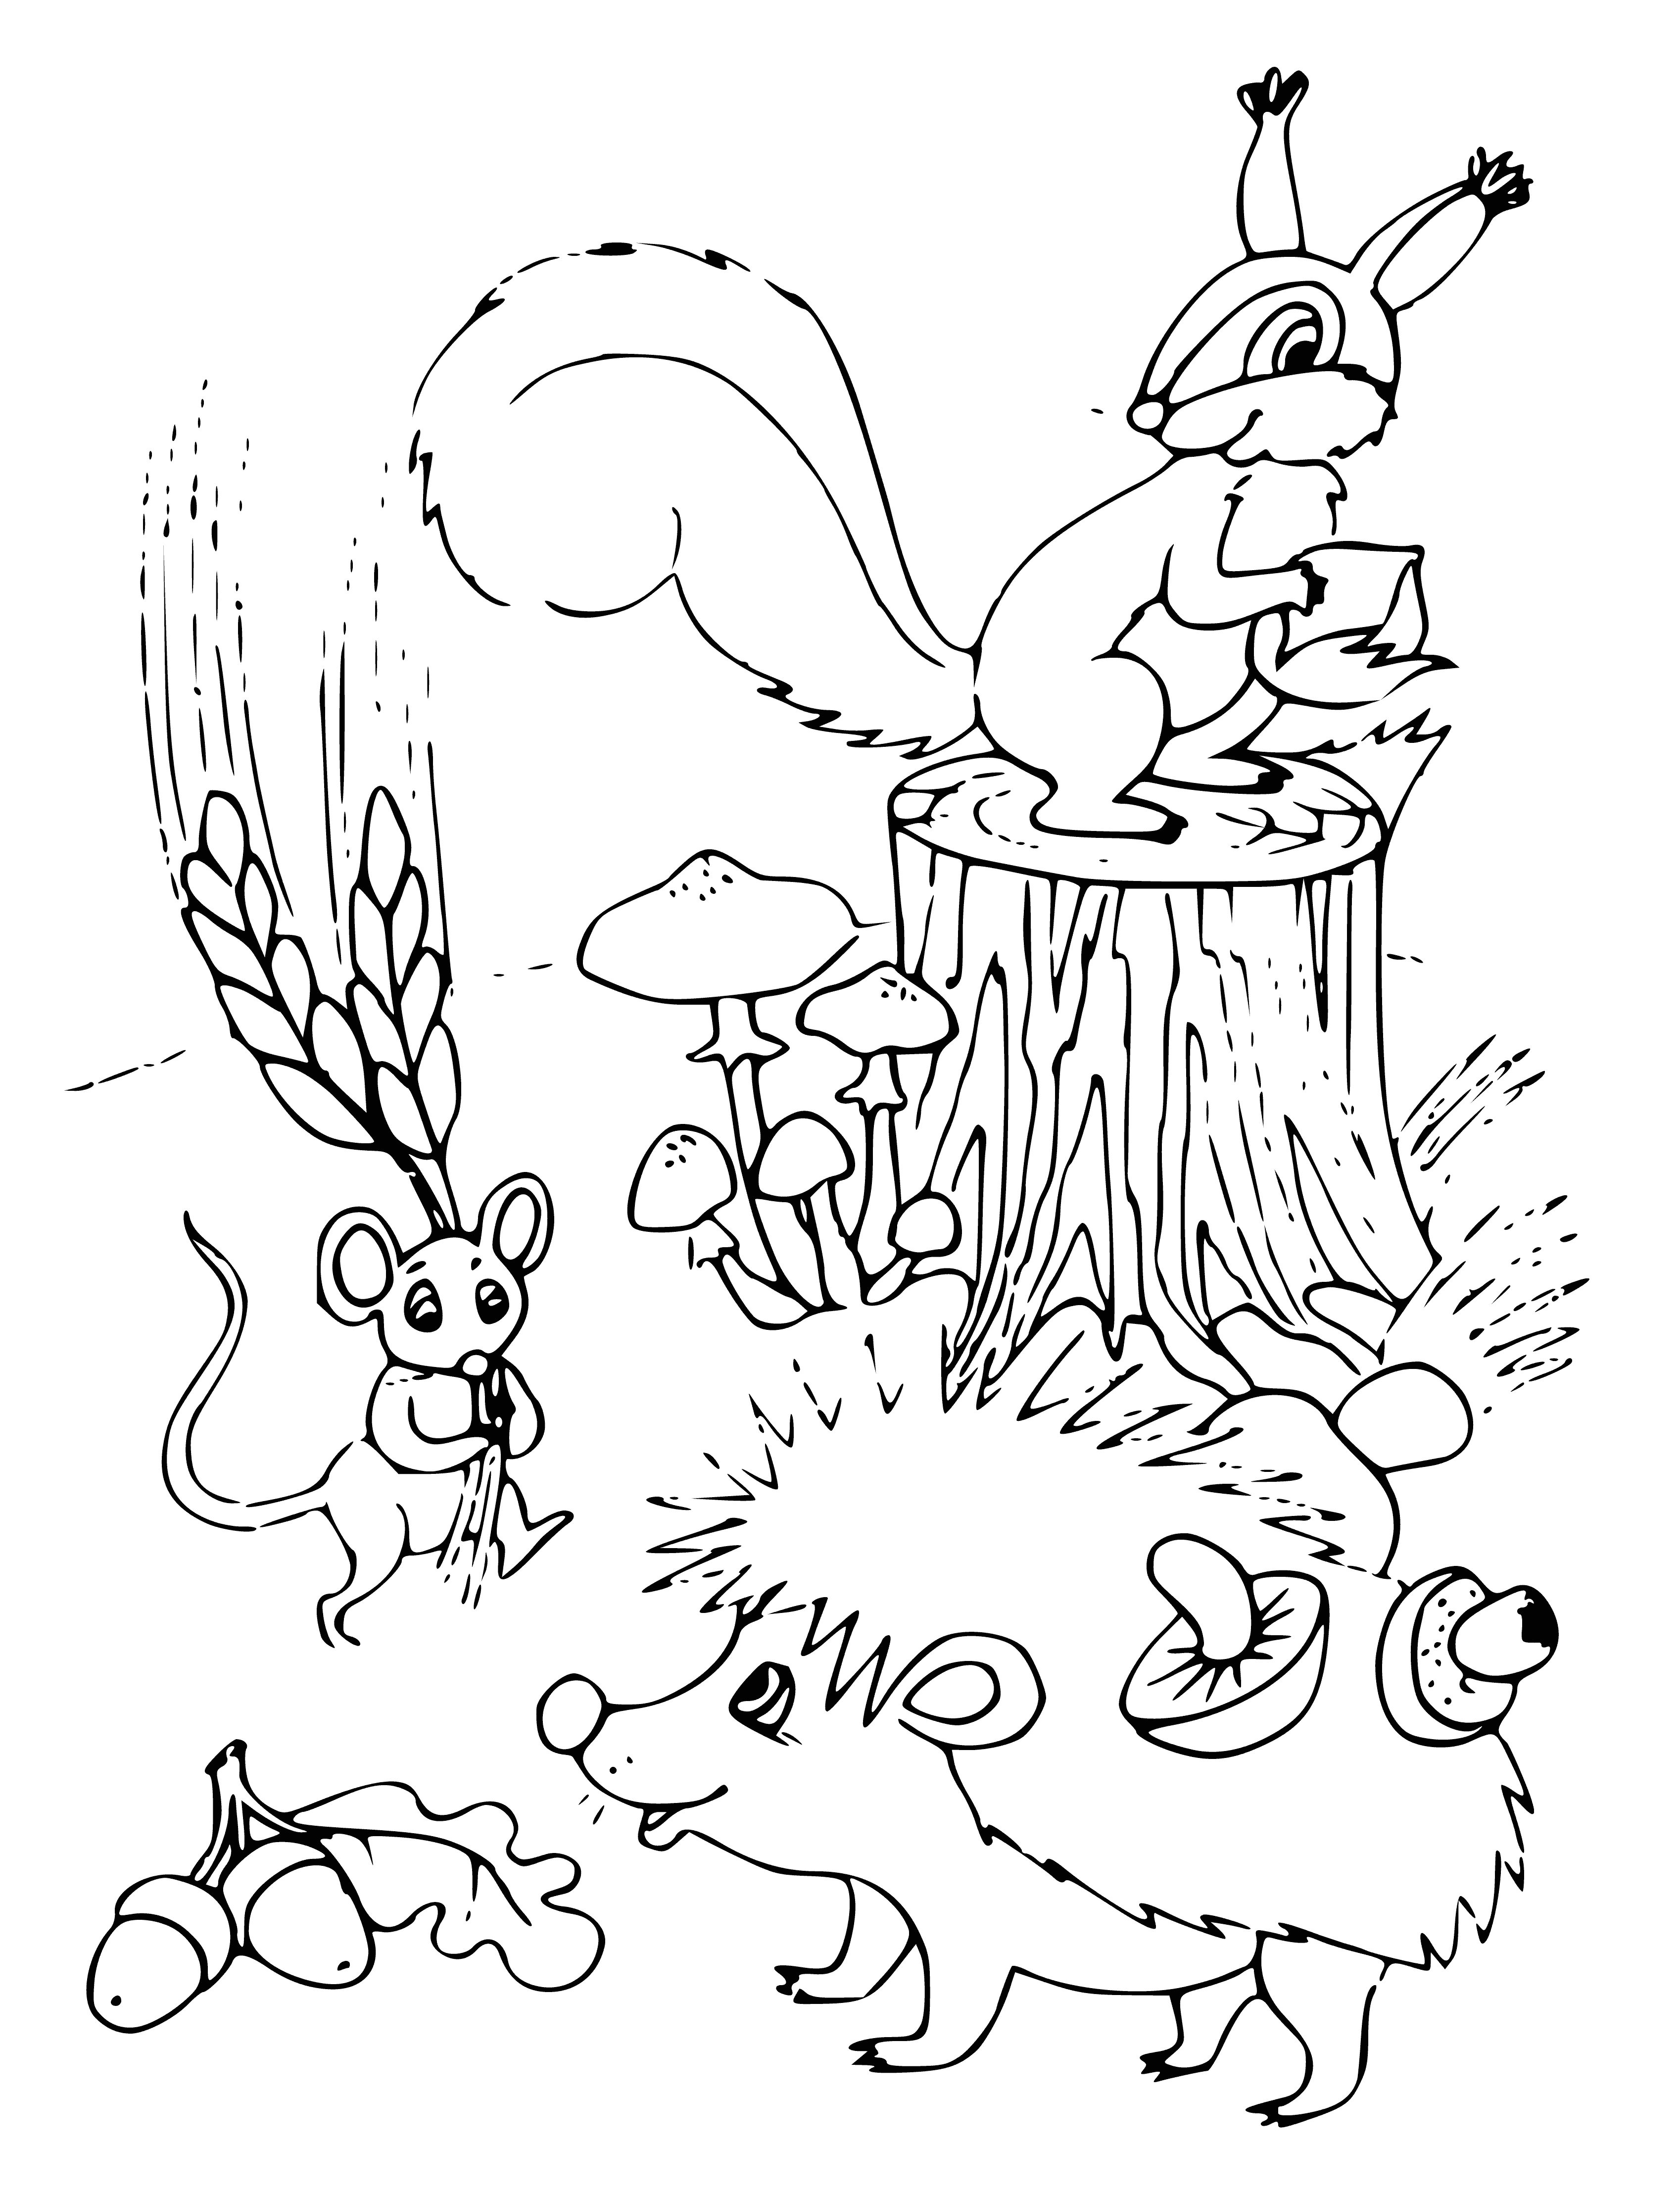 coloring page: Animals gathering wood/leaves for winter/picking apples off trees for food/shelter.